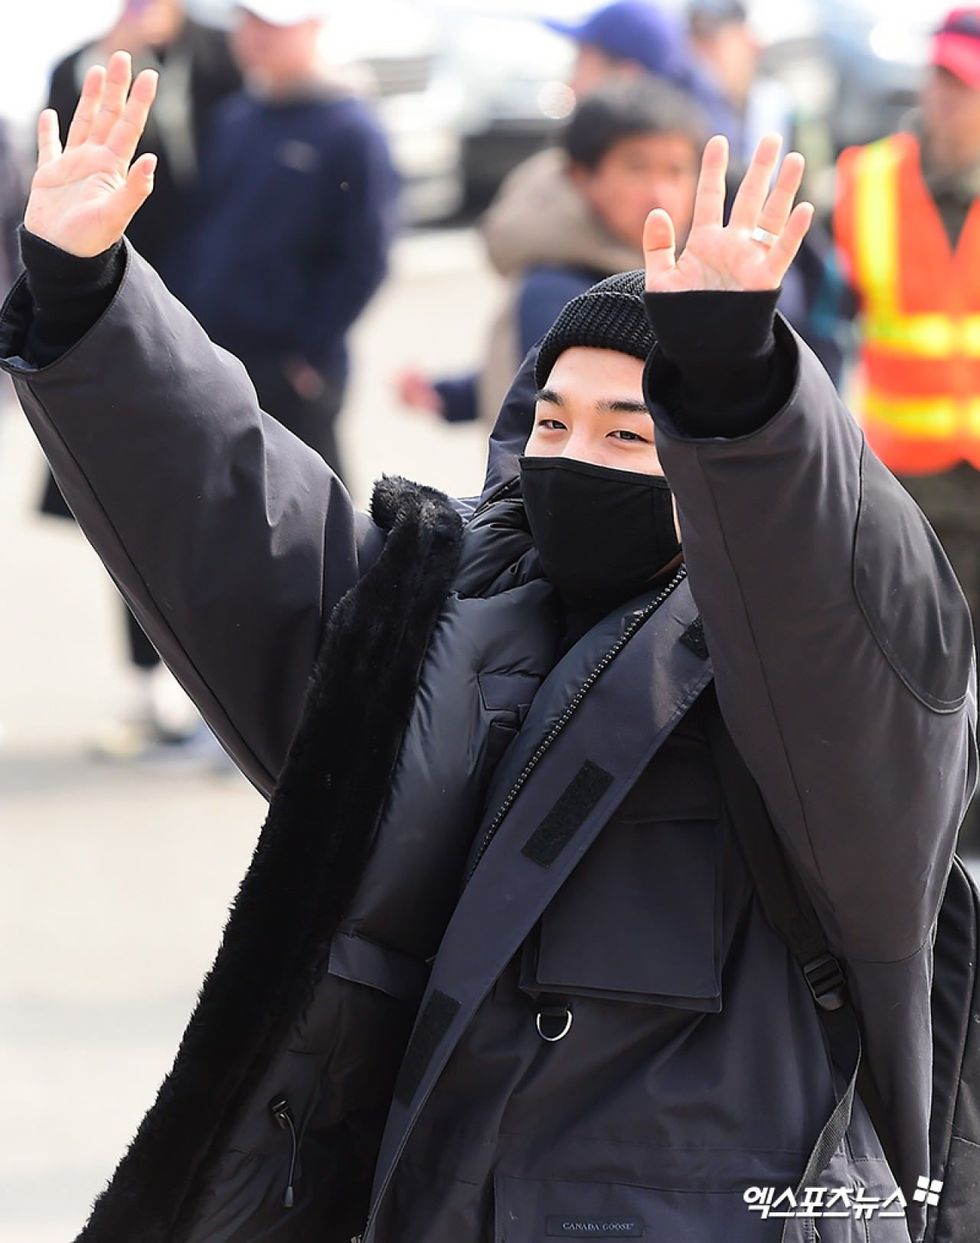 Gesture, Arm, Finger, Hand, Suit, Outerwear, Photography, Street fashion, Formal wear, V sign, 